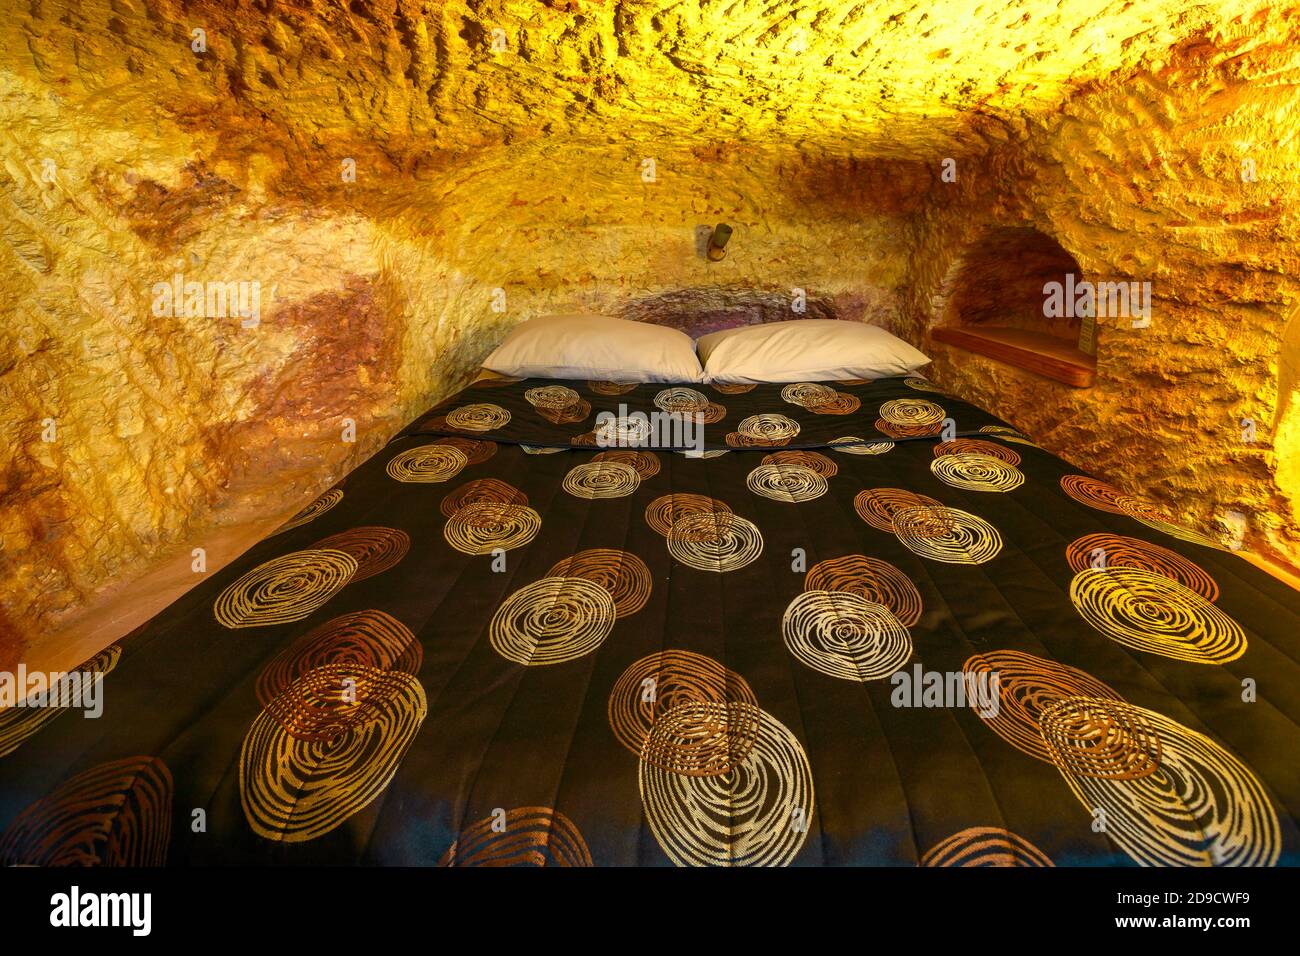 Coober Pedy, South Australia, Australia - Aug 28, 2019:Underground bed of an underground house carved in stone. Coober Pedy mining town of Australia Stock Photo